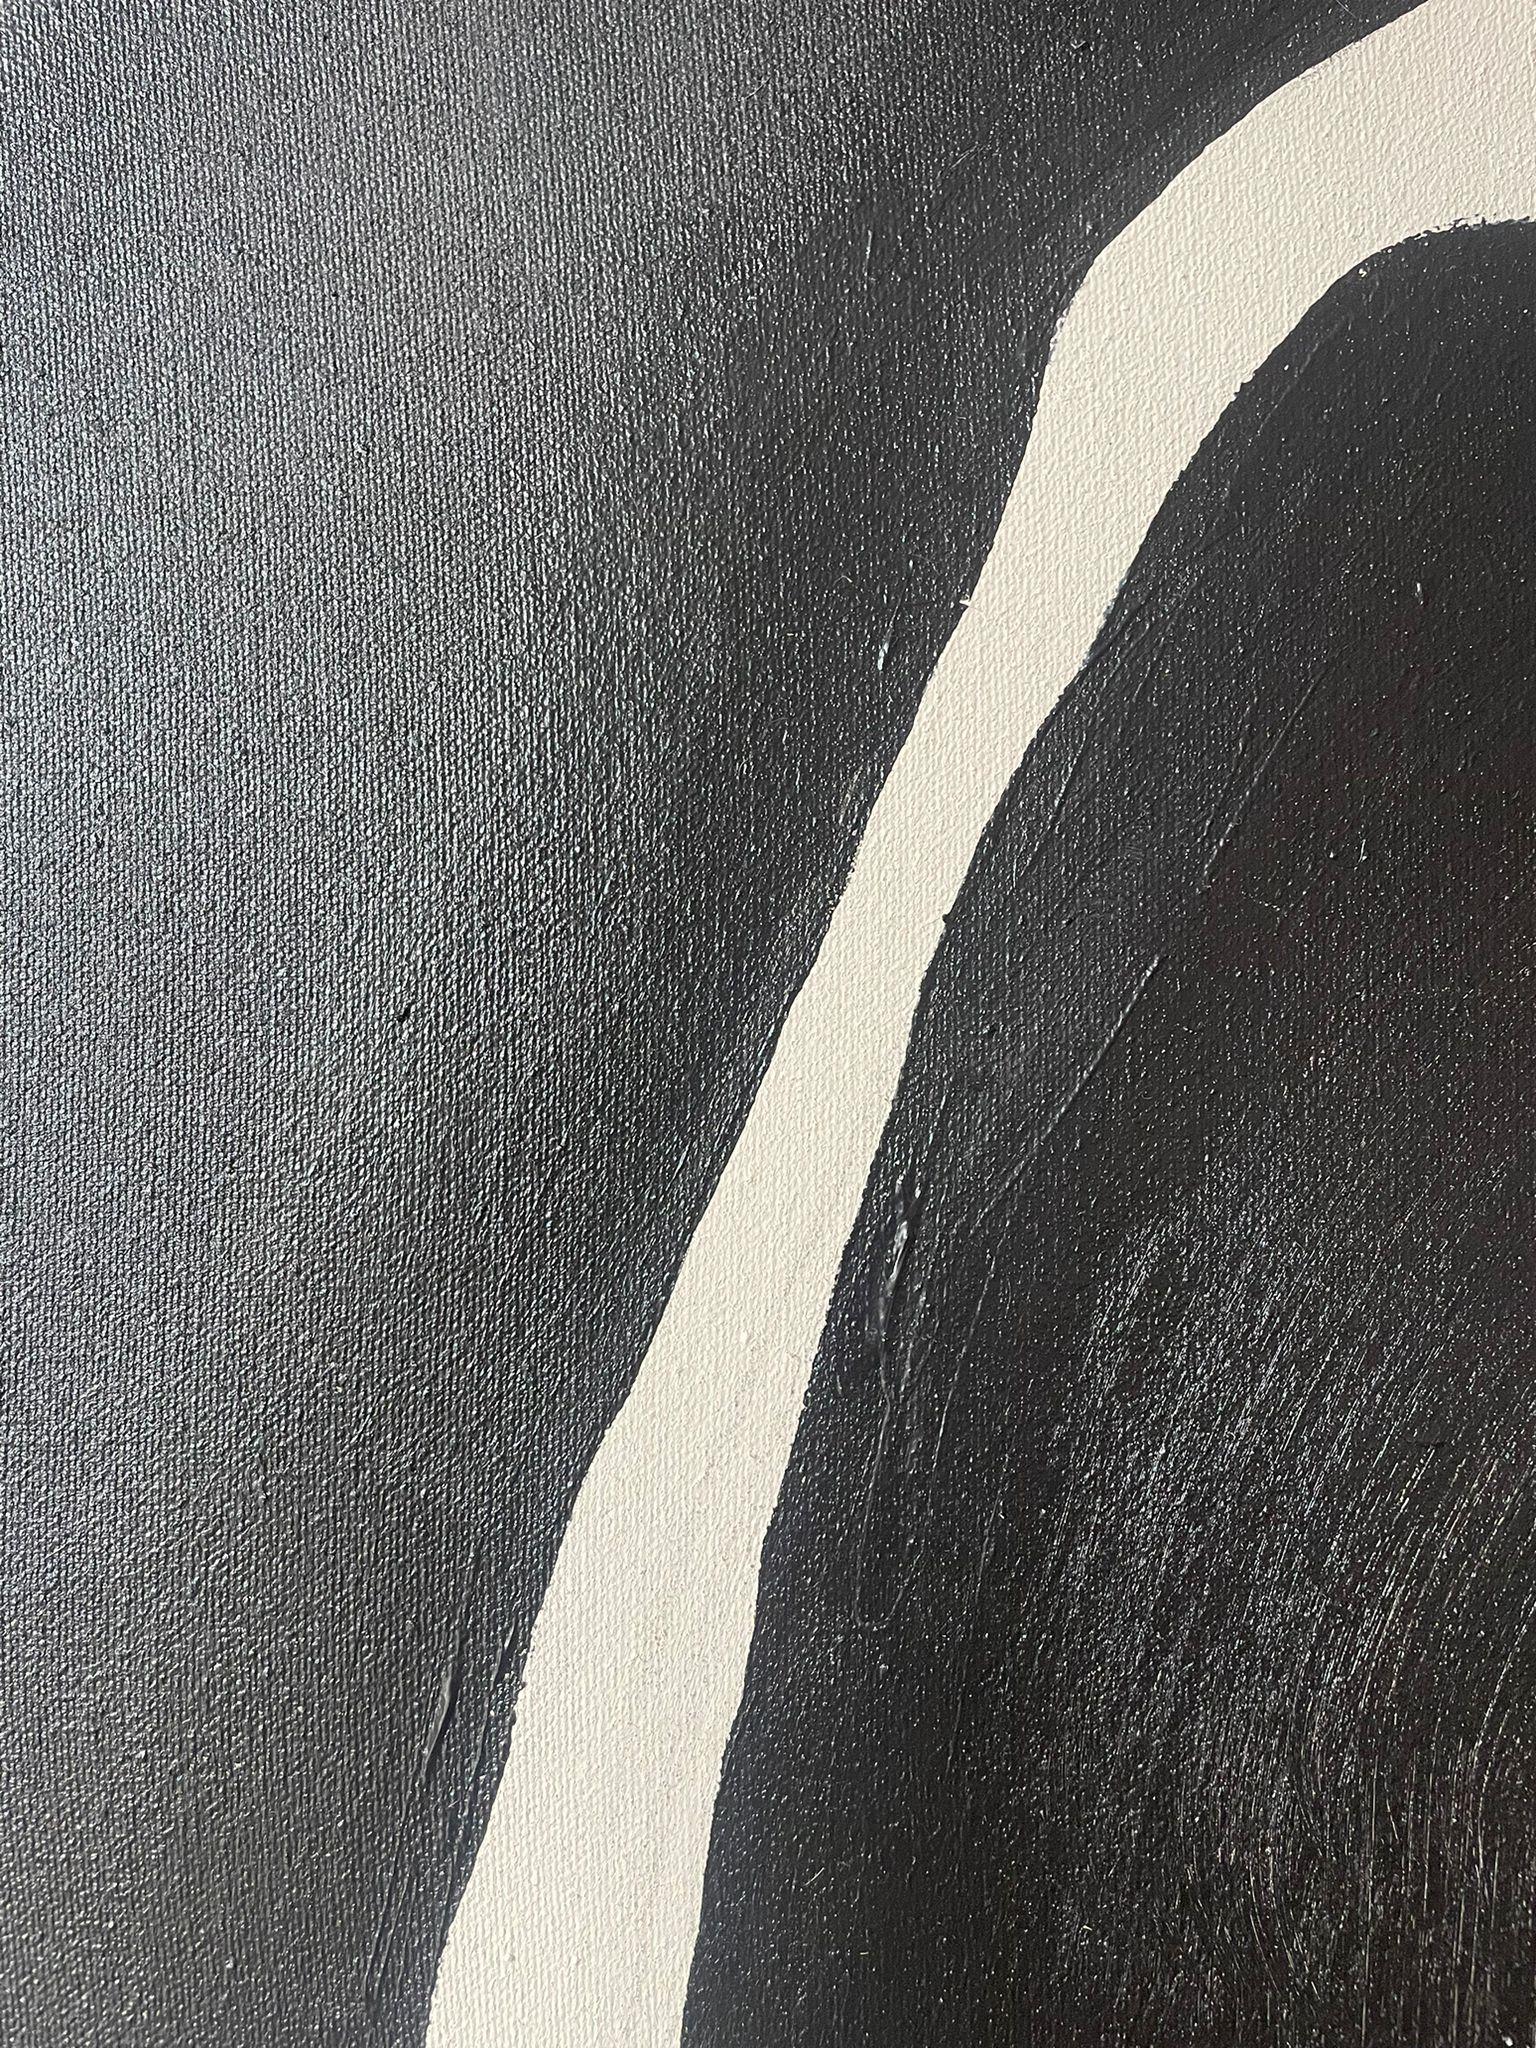 ABSTRACT Painting Spanish Black and White Lines Artist Alicia Gimeno 2023 For Sale 3